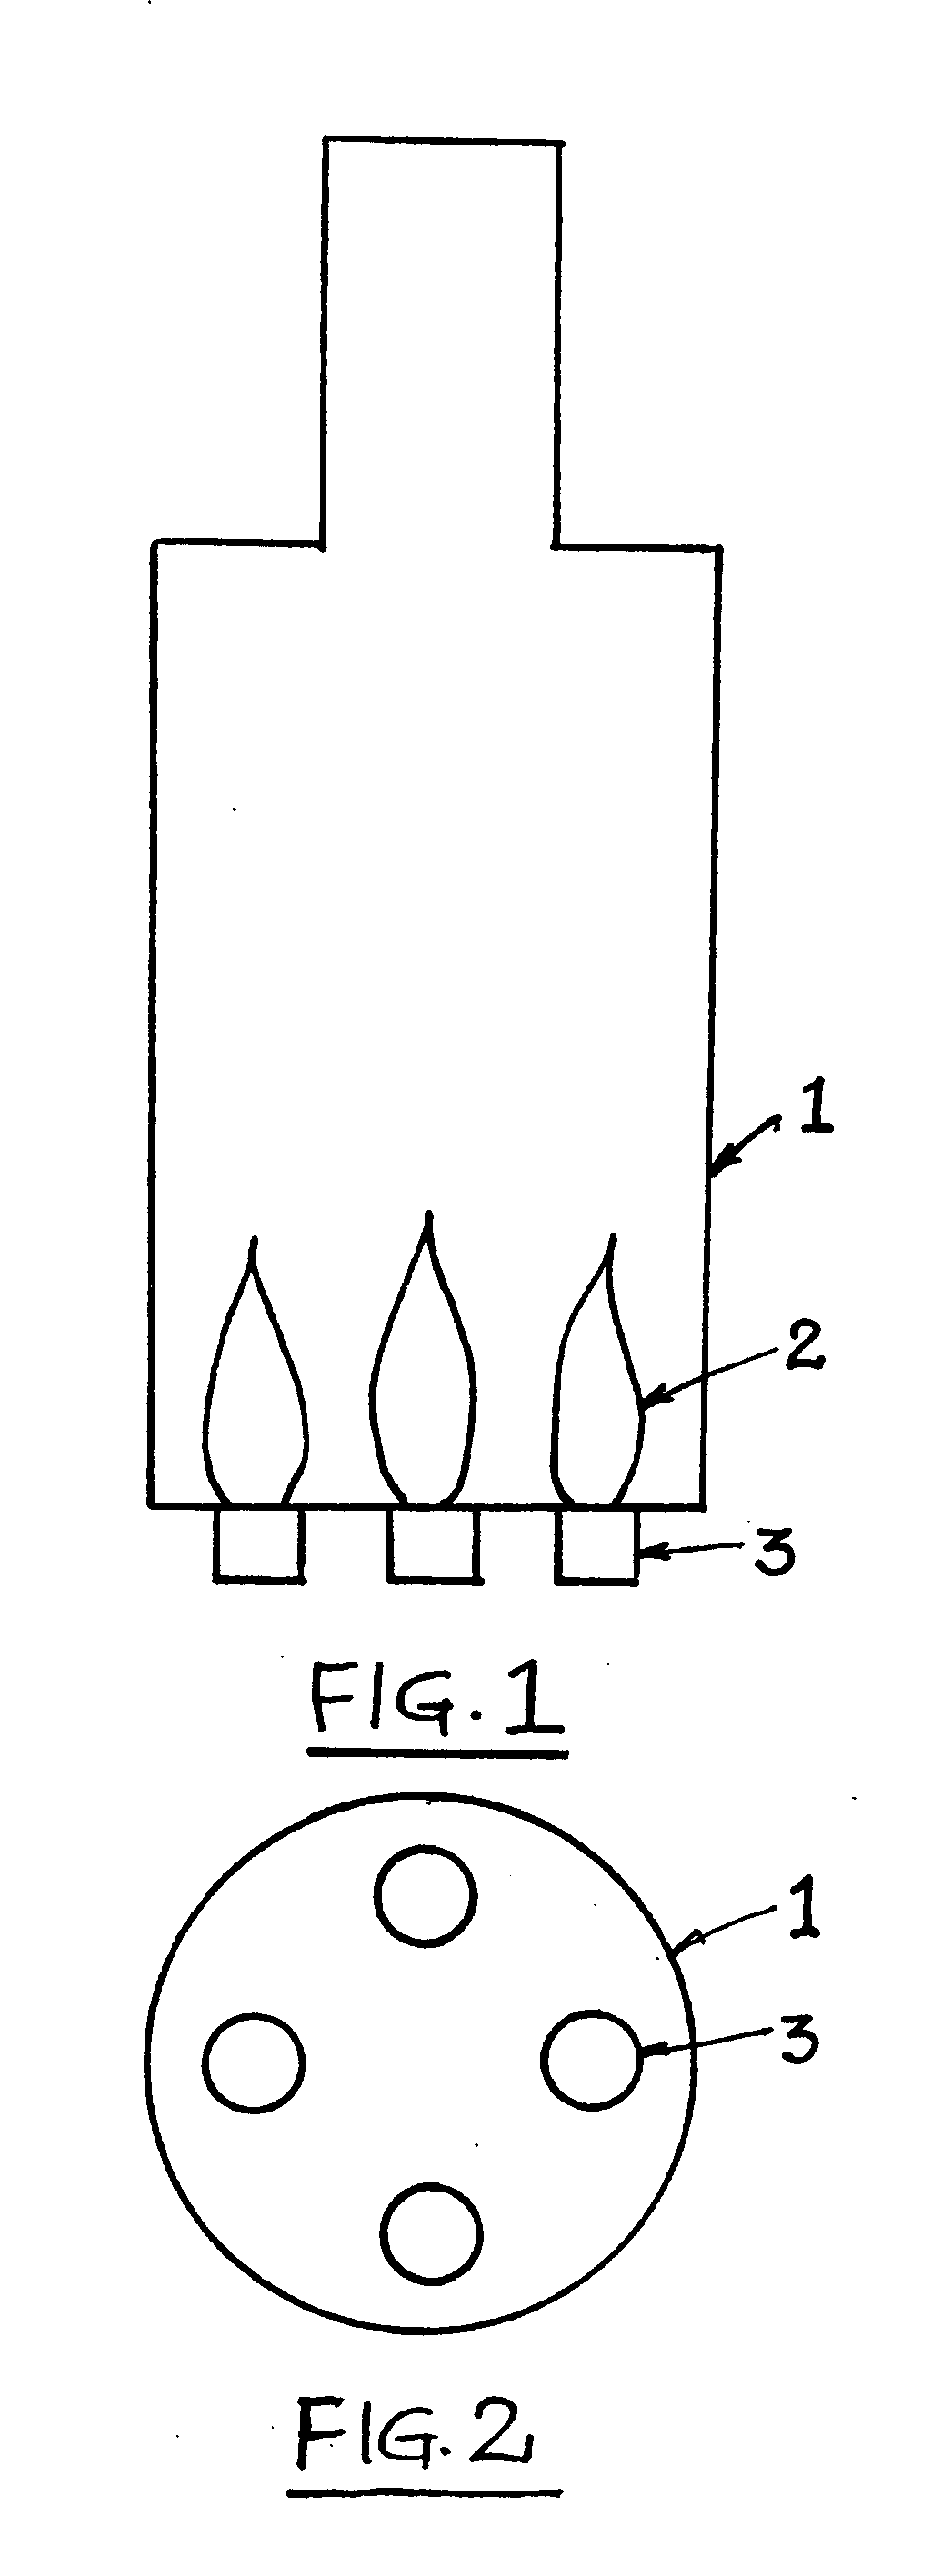 Monitoring of flames using optical fibers and video camera vision system